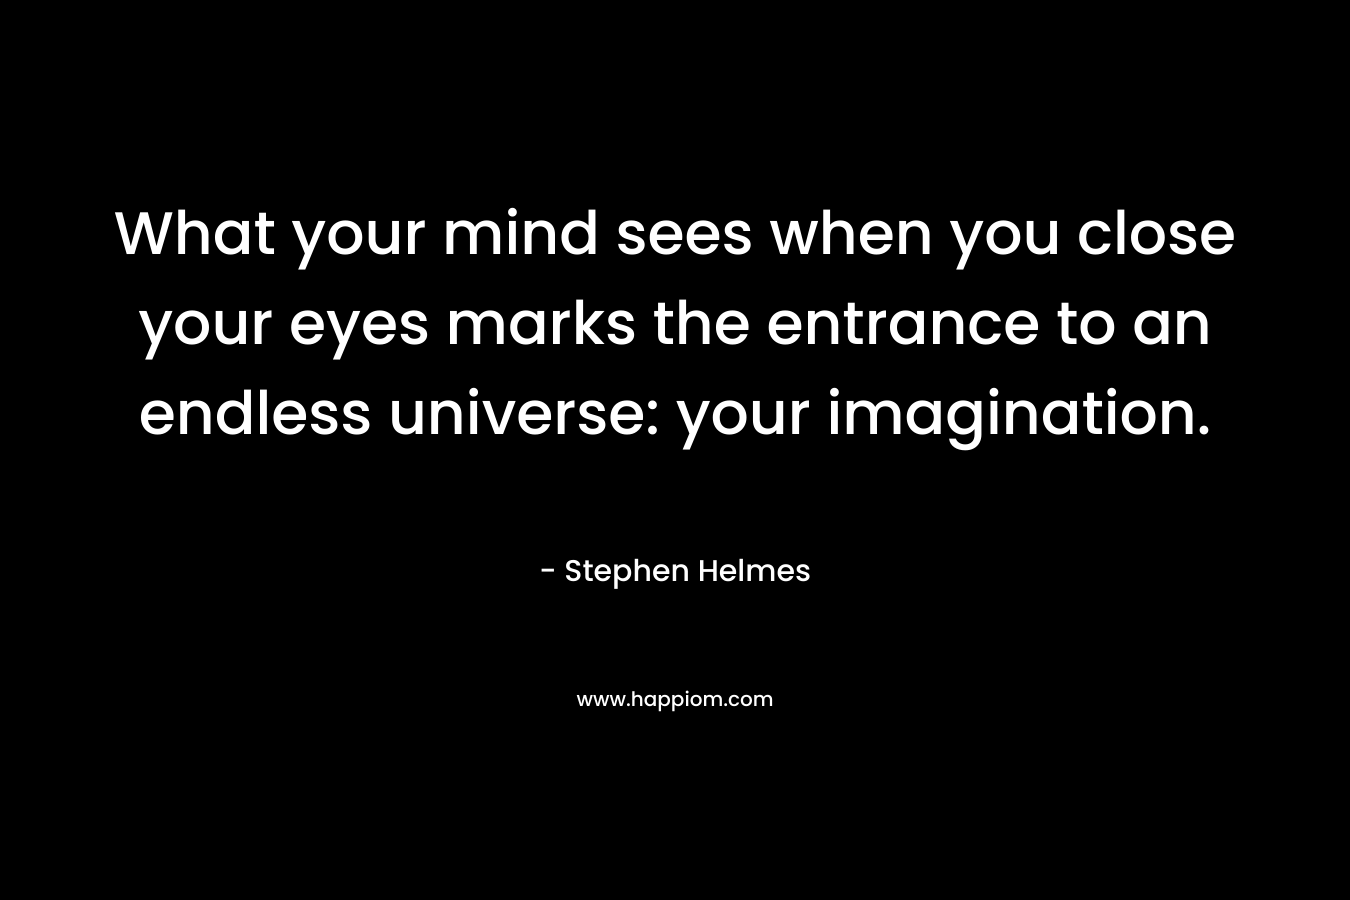 What your mind sees when you close your eyes marks the entrance to an endless universe: your imagination. – Stephen Helmes